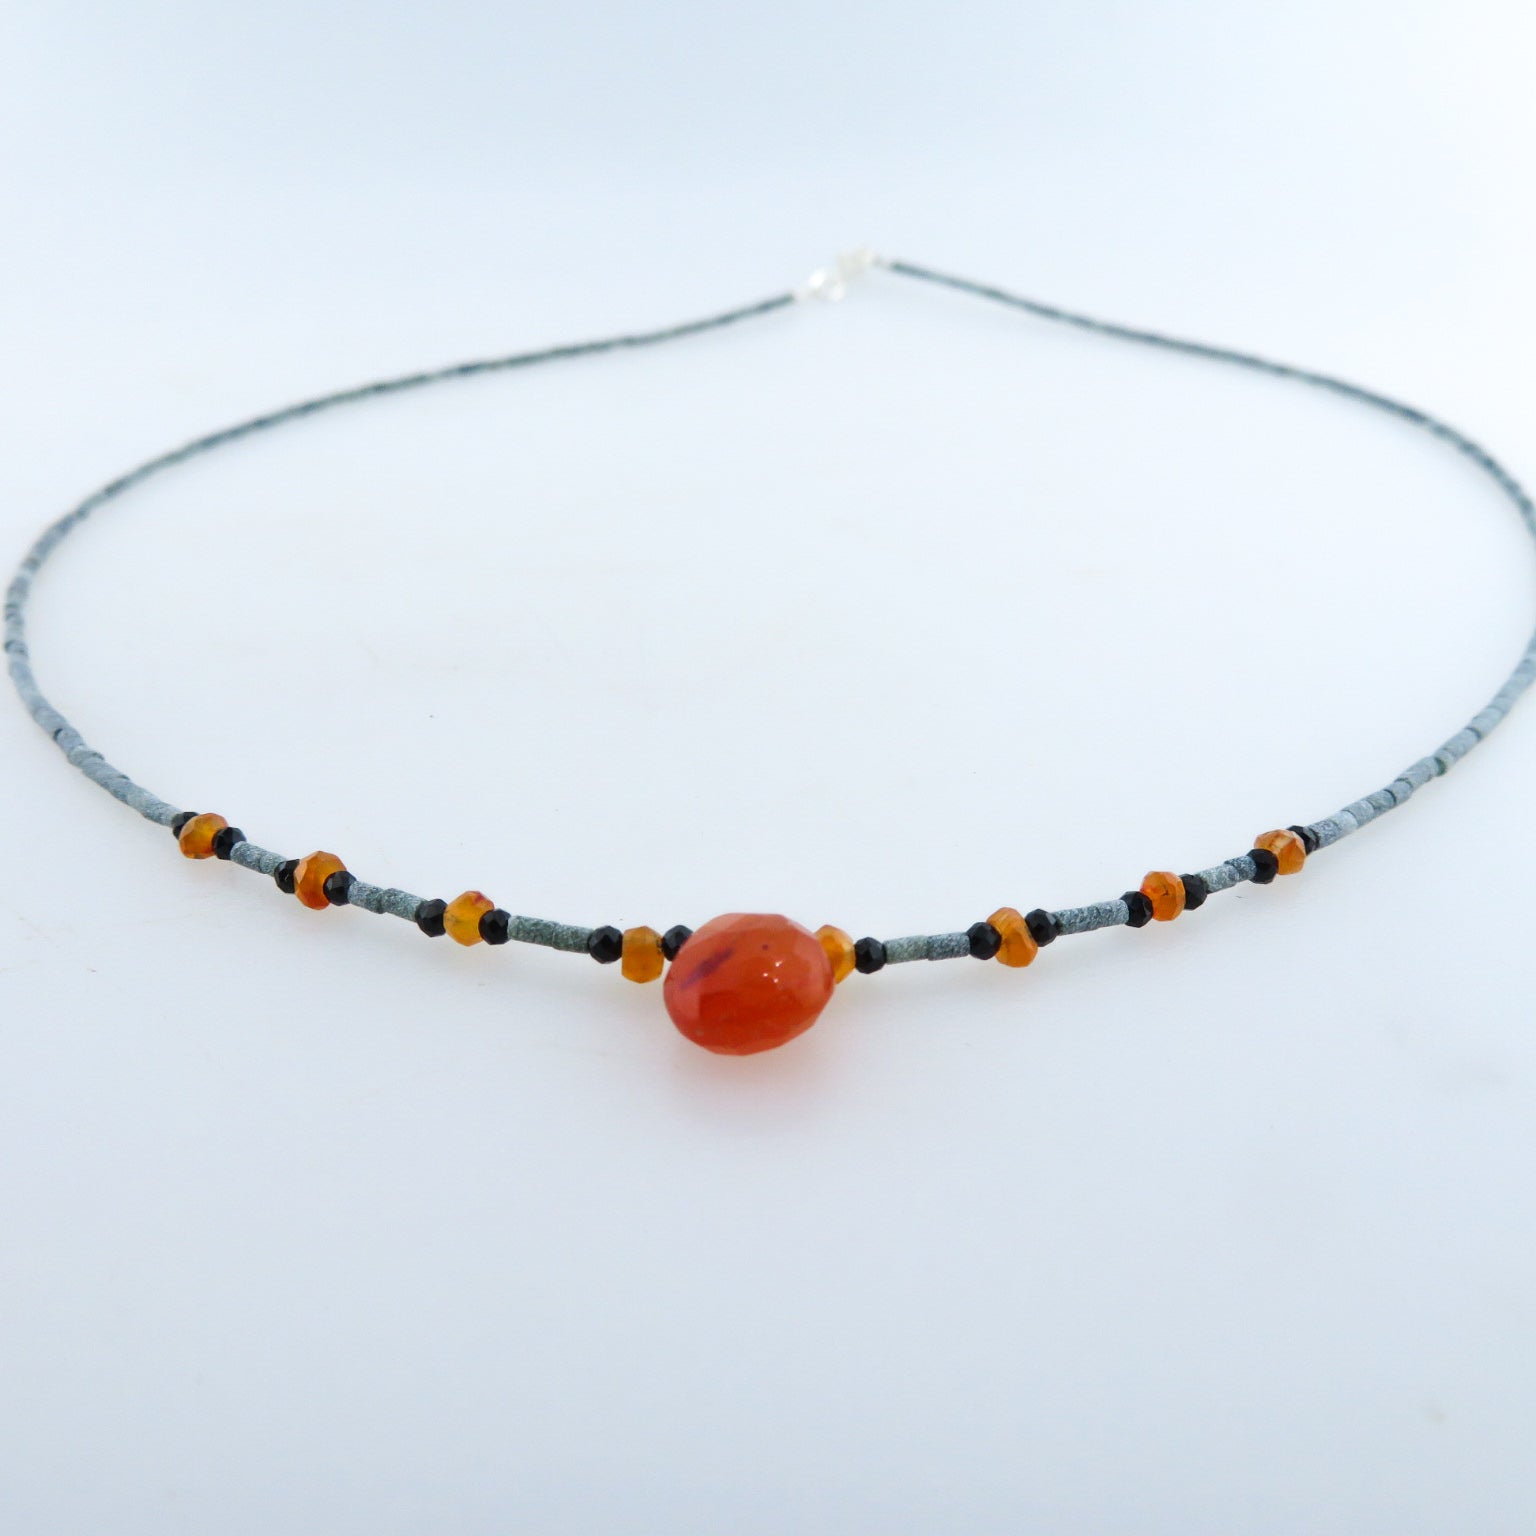 Jade Necklace with Carnelian, Black Onyx and Silver Beads